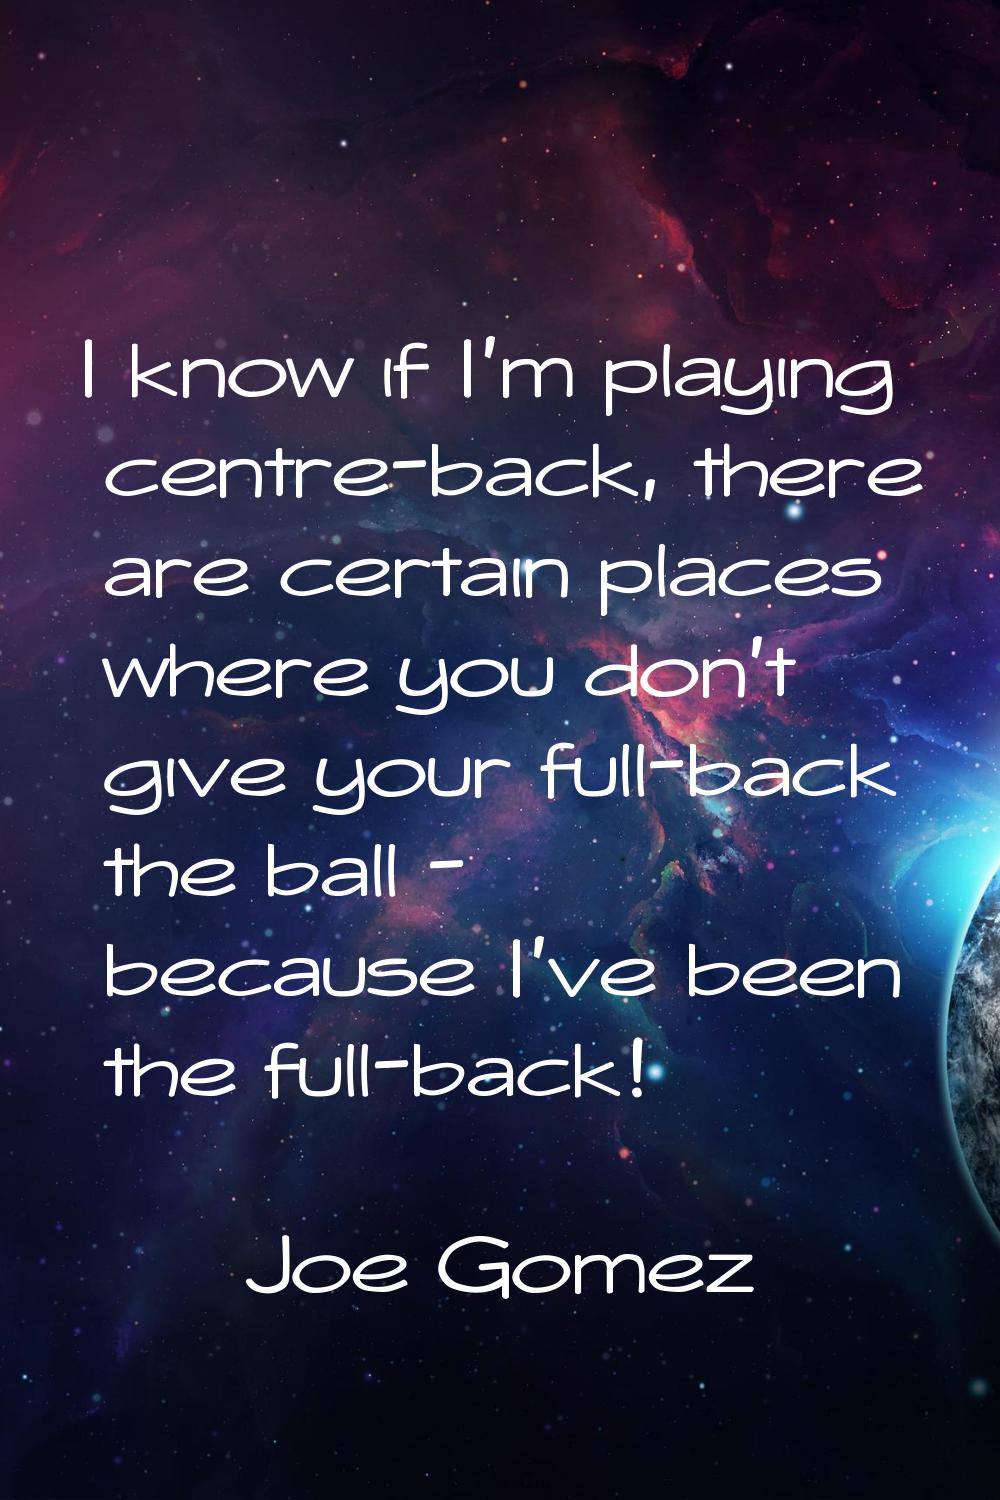 I know if I'm playing centre-back, there are certain places where you don't give your full-back the